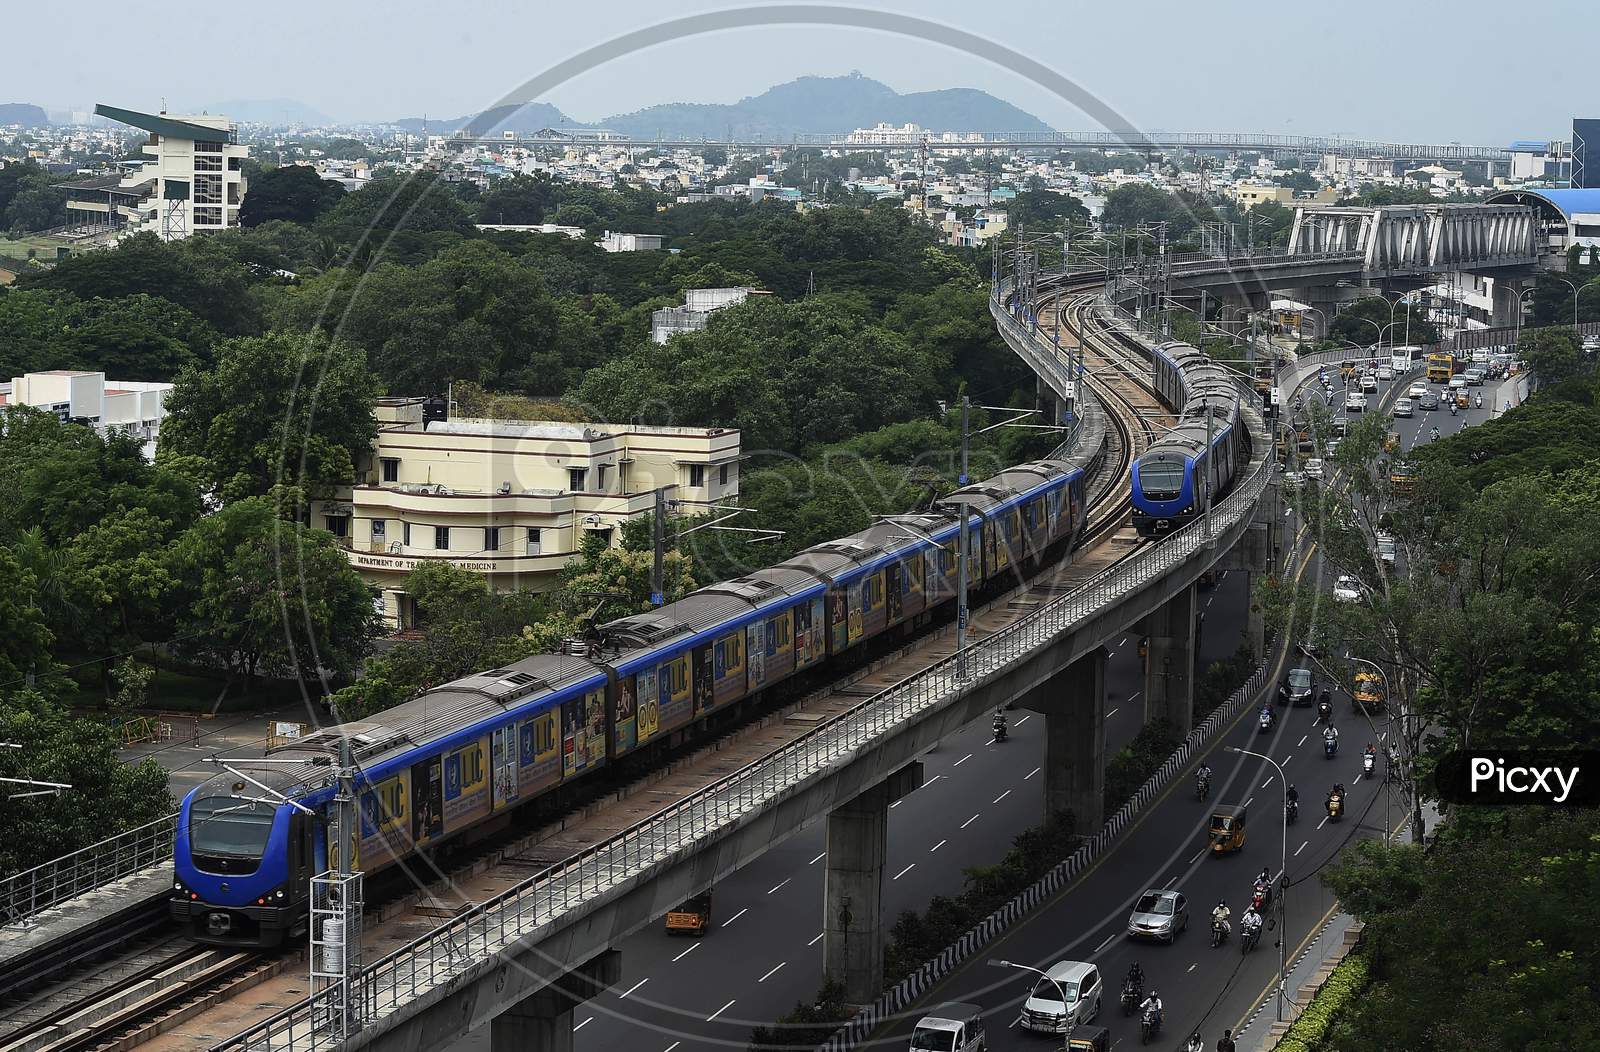 Metro Trains Run On Tracks Following Resumption Of Chennai Metro Services After Over Five Months Suspension Due To Covid-19 Outbreak, In Chennai, Tuesday, Sept. 8, 2020